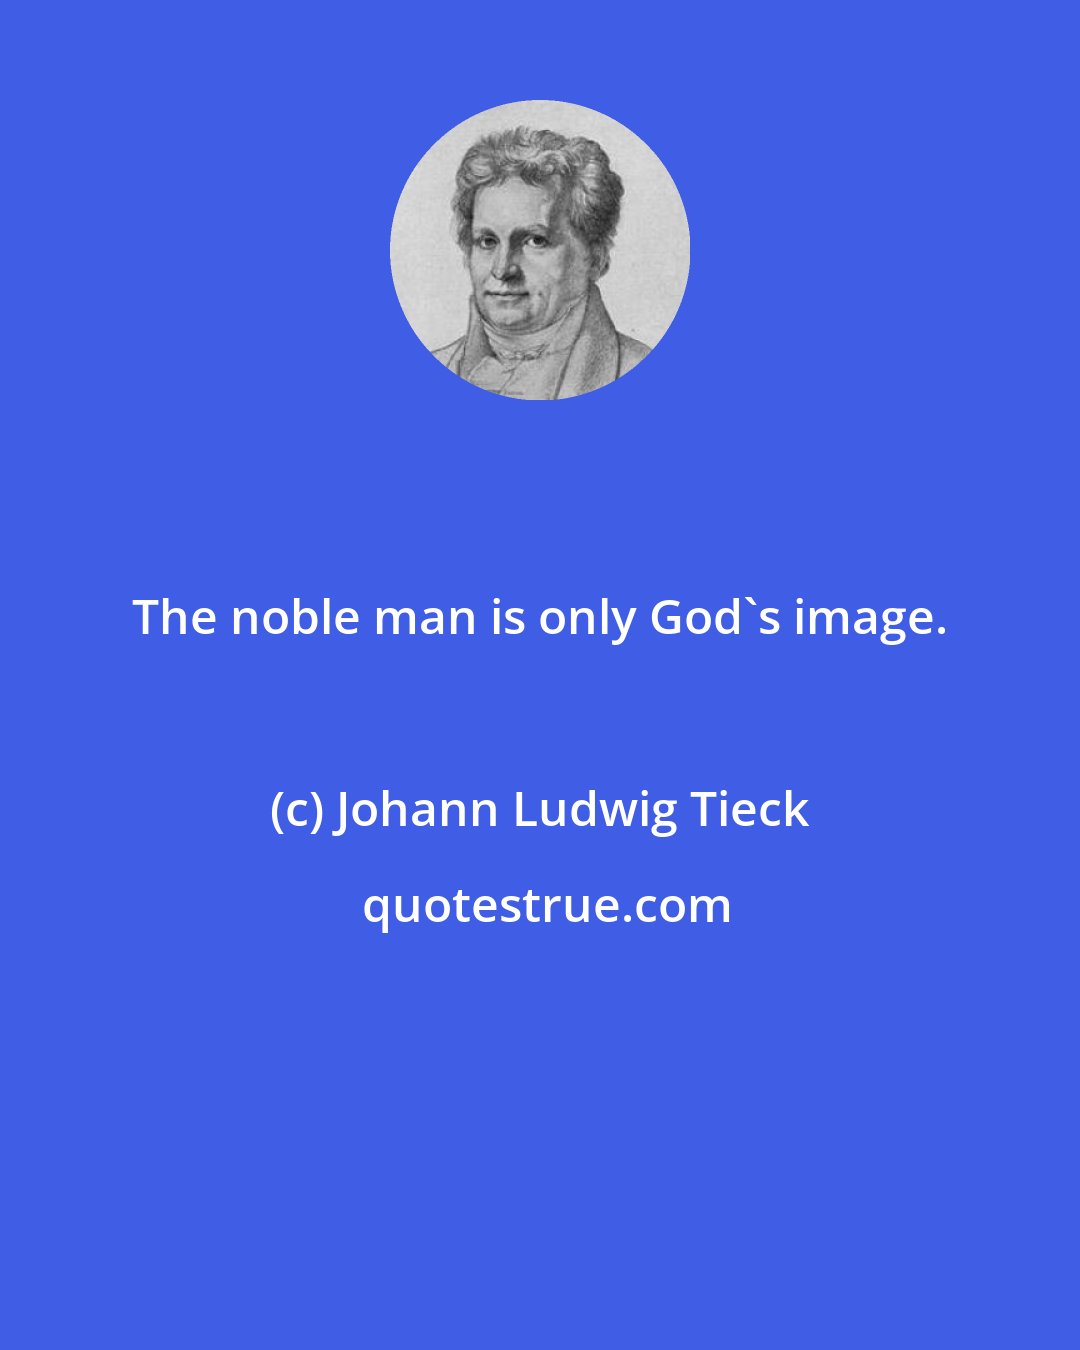 Johann Ludwig Tieck: The noble man is only God's image.